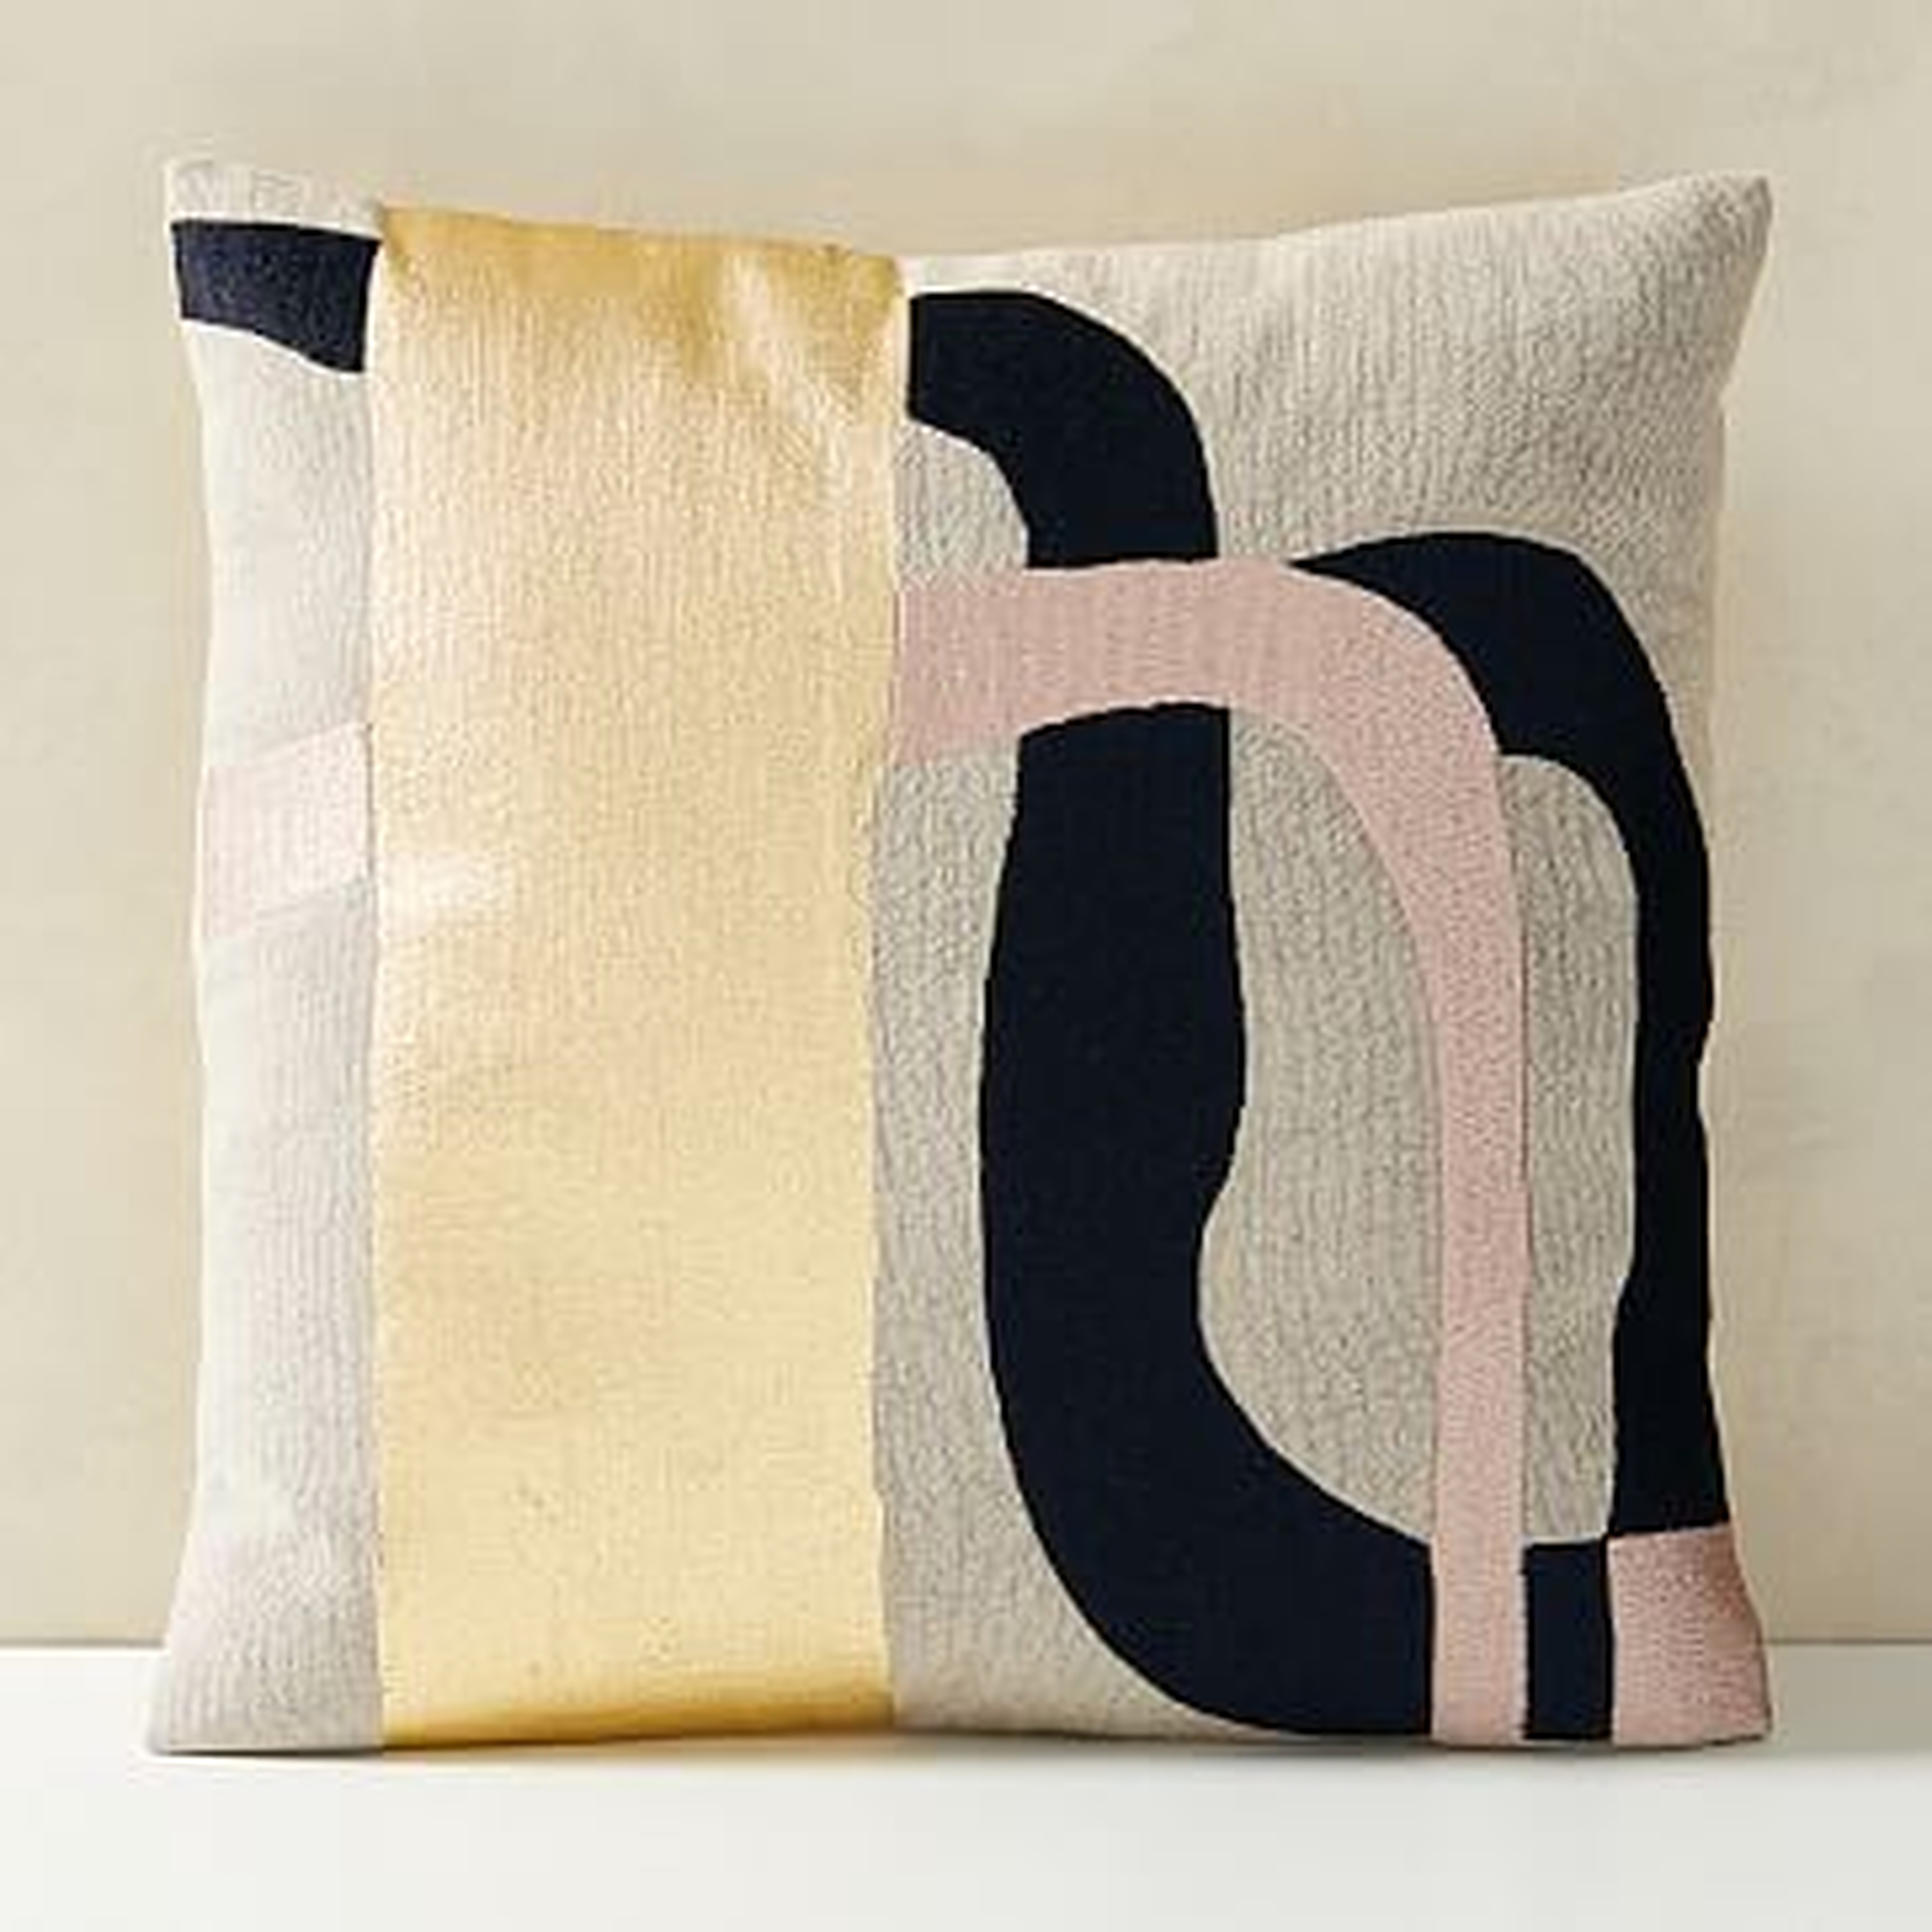 Embroidered Metallic Curves Pillow Cover, 20"x20", Midnight - West Elm